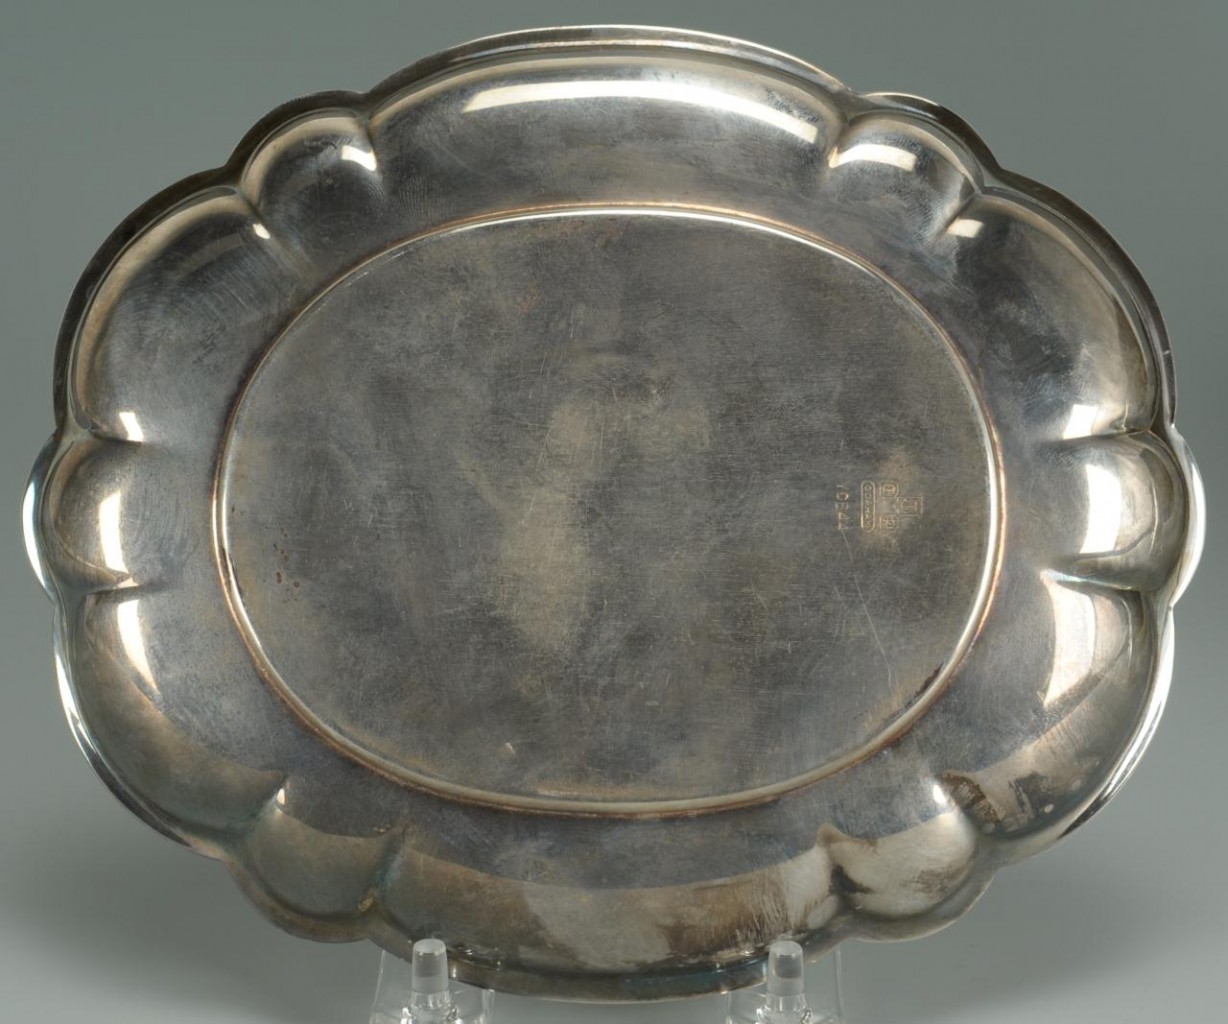 Lot 745: Two Sterling Candy Dishes by Reed & Barton